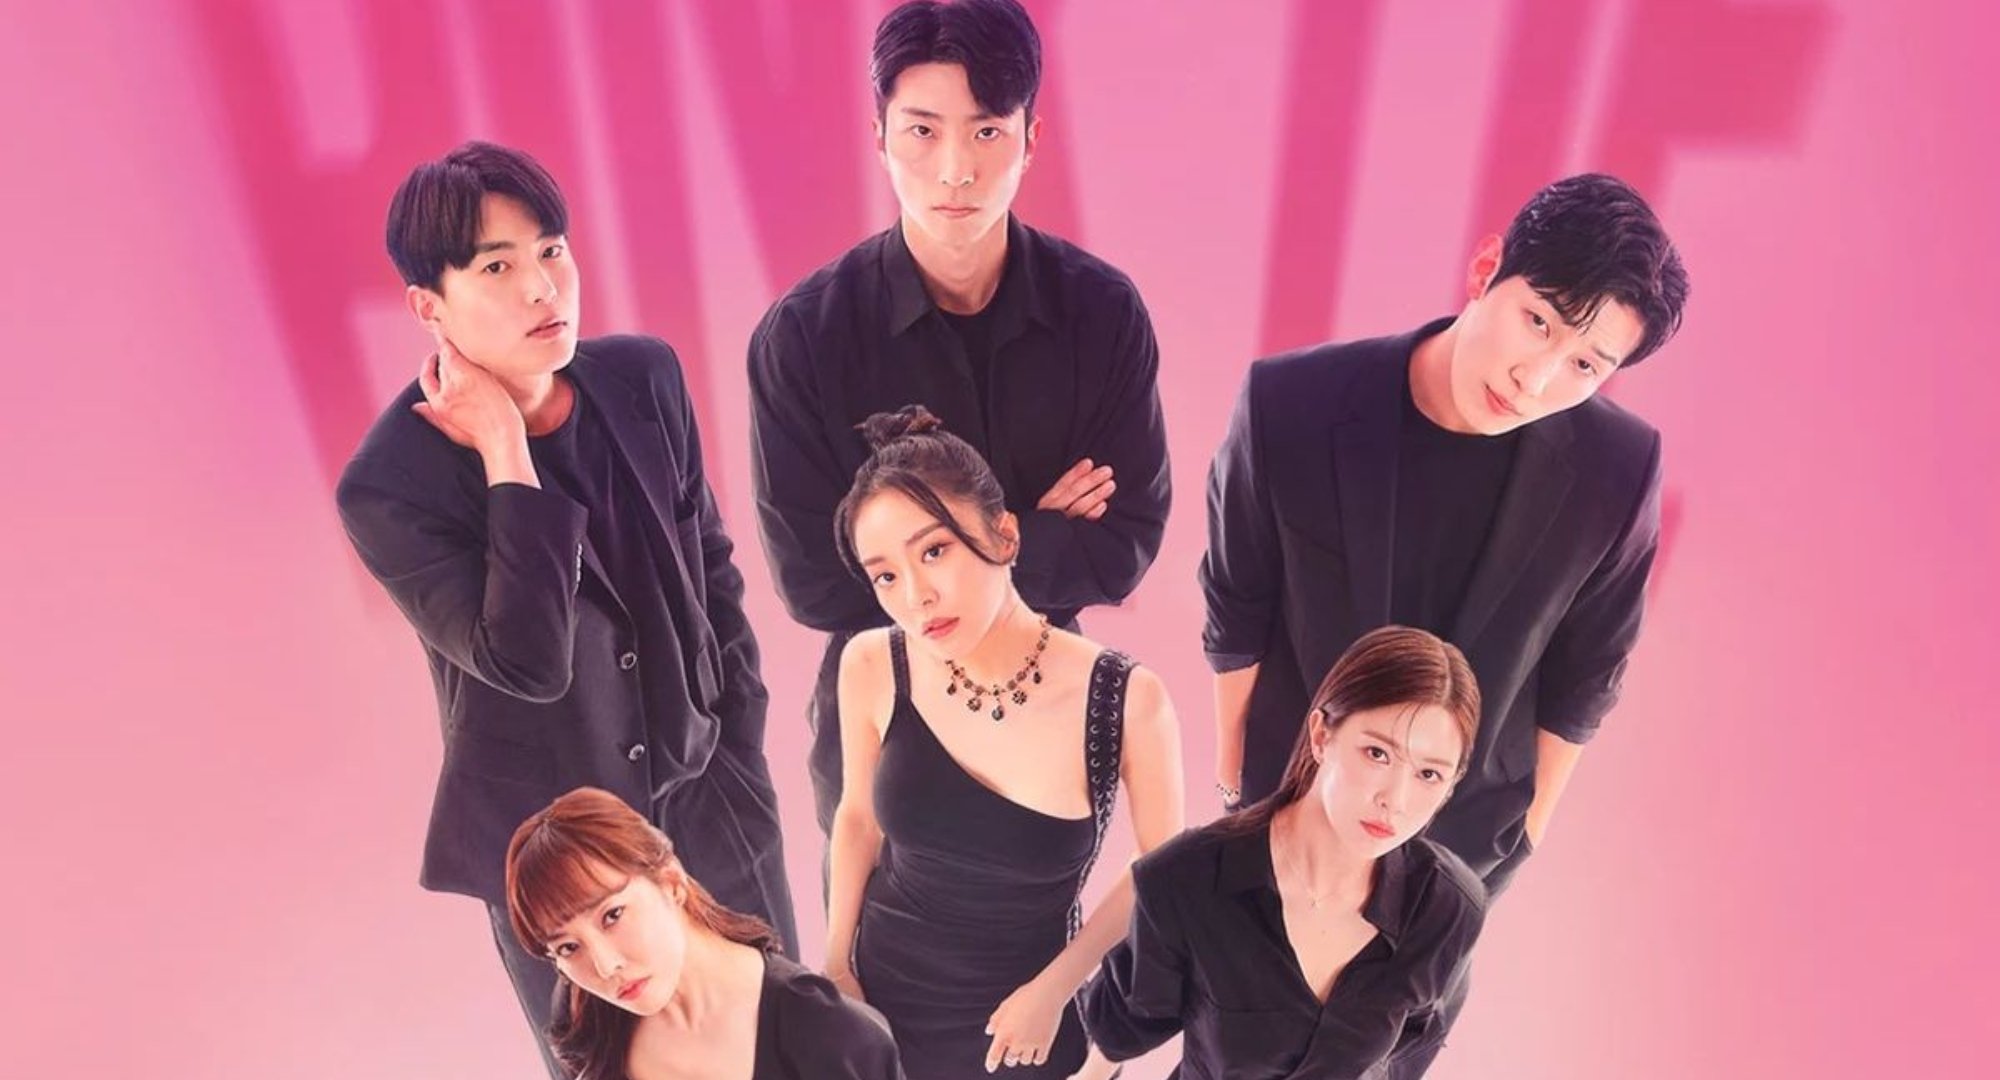 6 Korean Dating Series to Watch for Some Drama